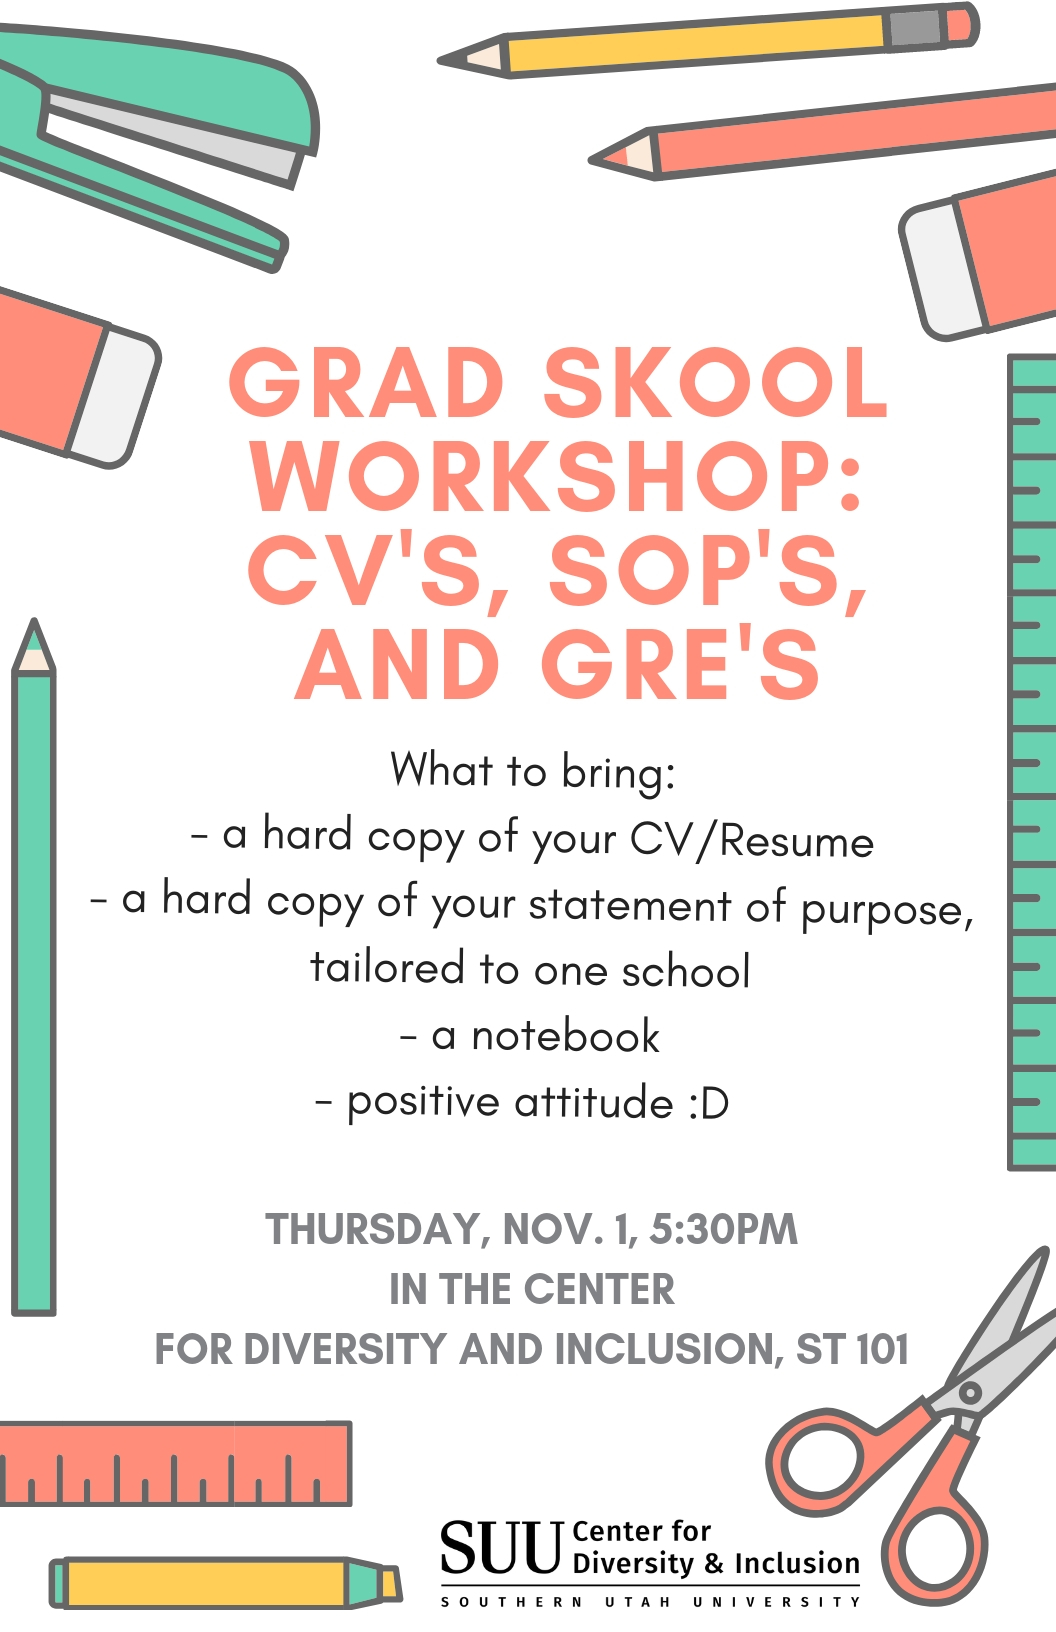 Grad Skool Workshop: CV's, SOP's, and GRE's. What to bring: a hard copy of your CV/Resume, a hard copy of you statement of purpose, tailored to one school, a notebook, positive attitude. Thurs, Nov 1 in the CDI